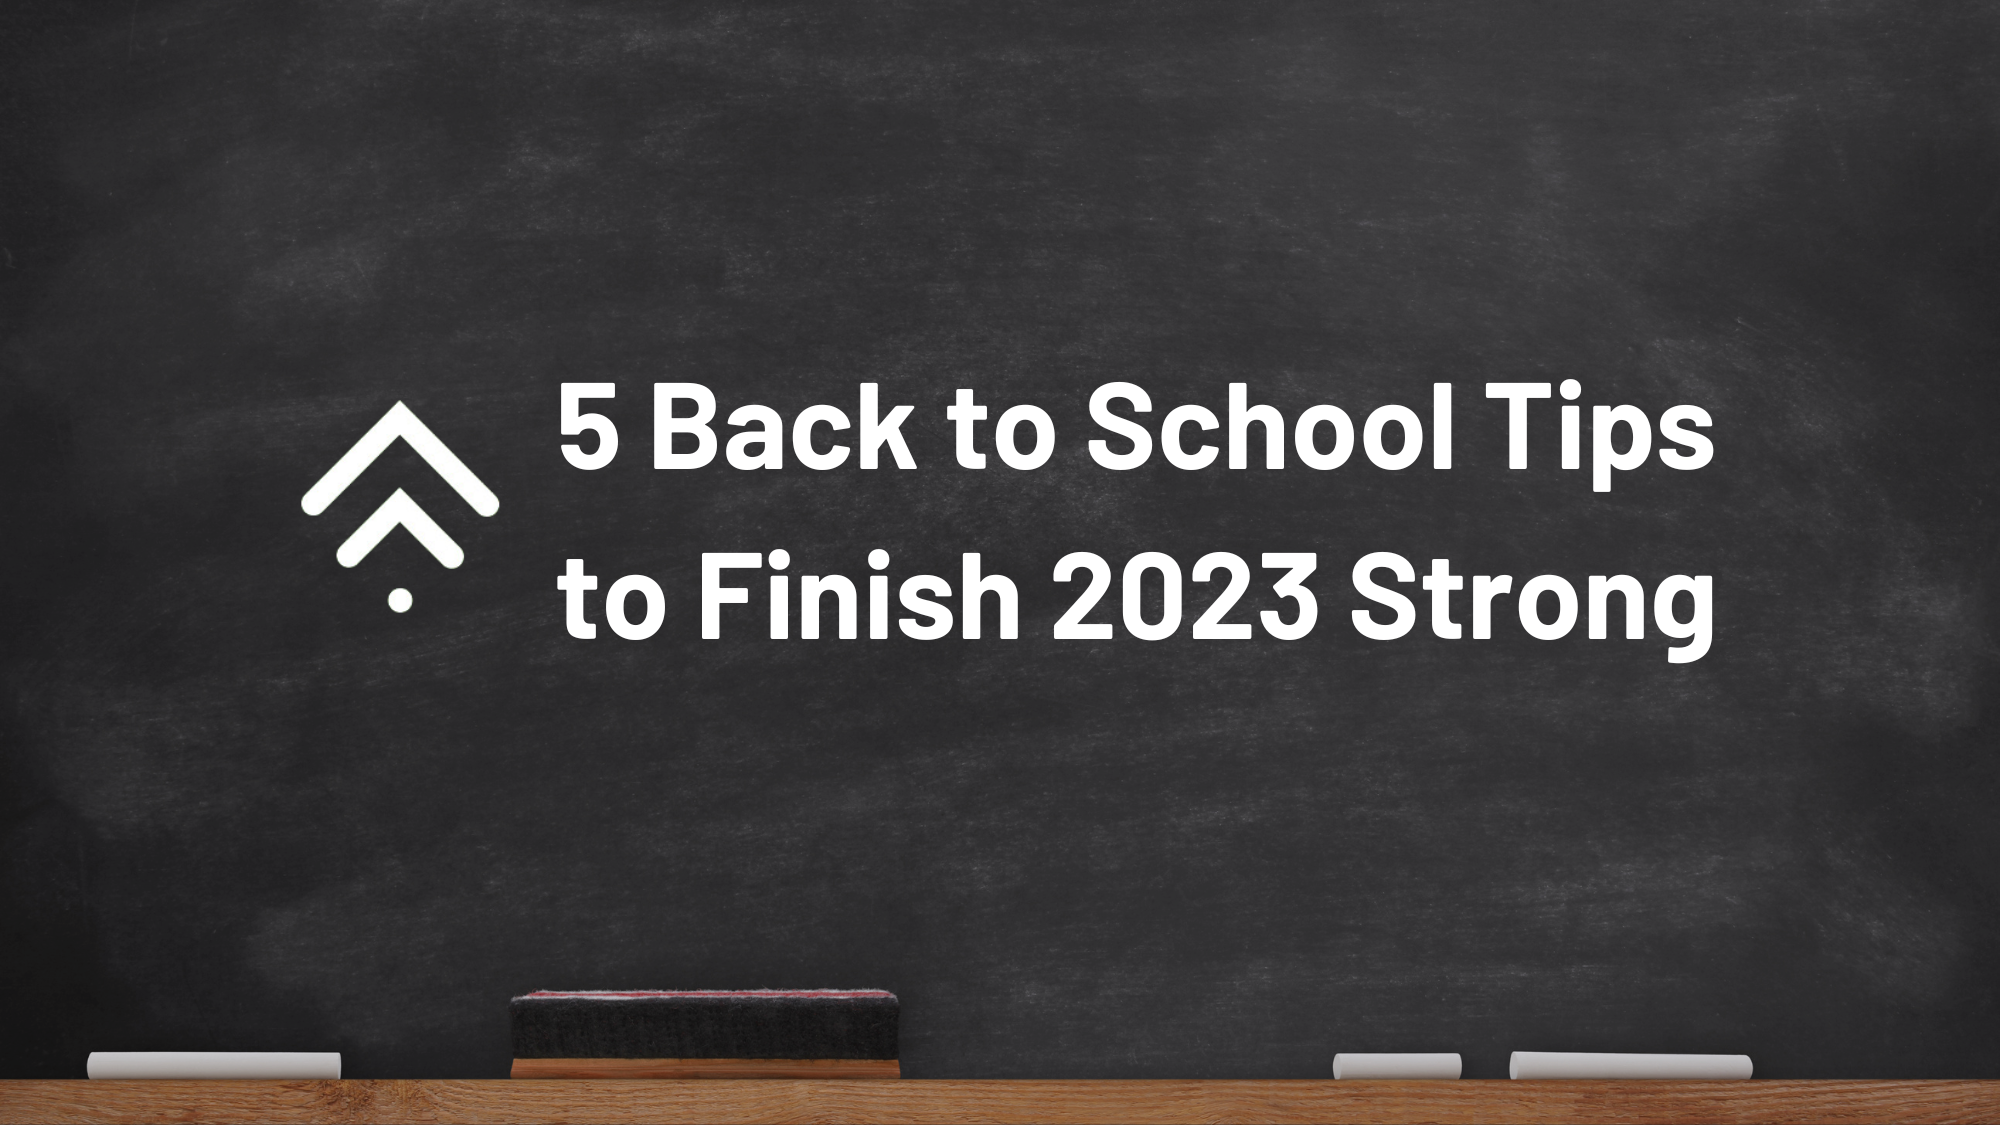 5 Back to School Tips to Finish 2023 Strong